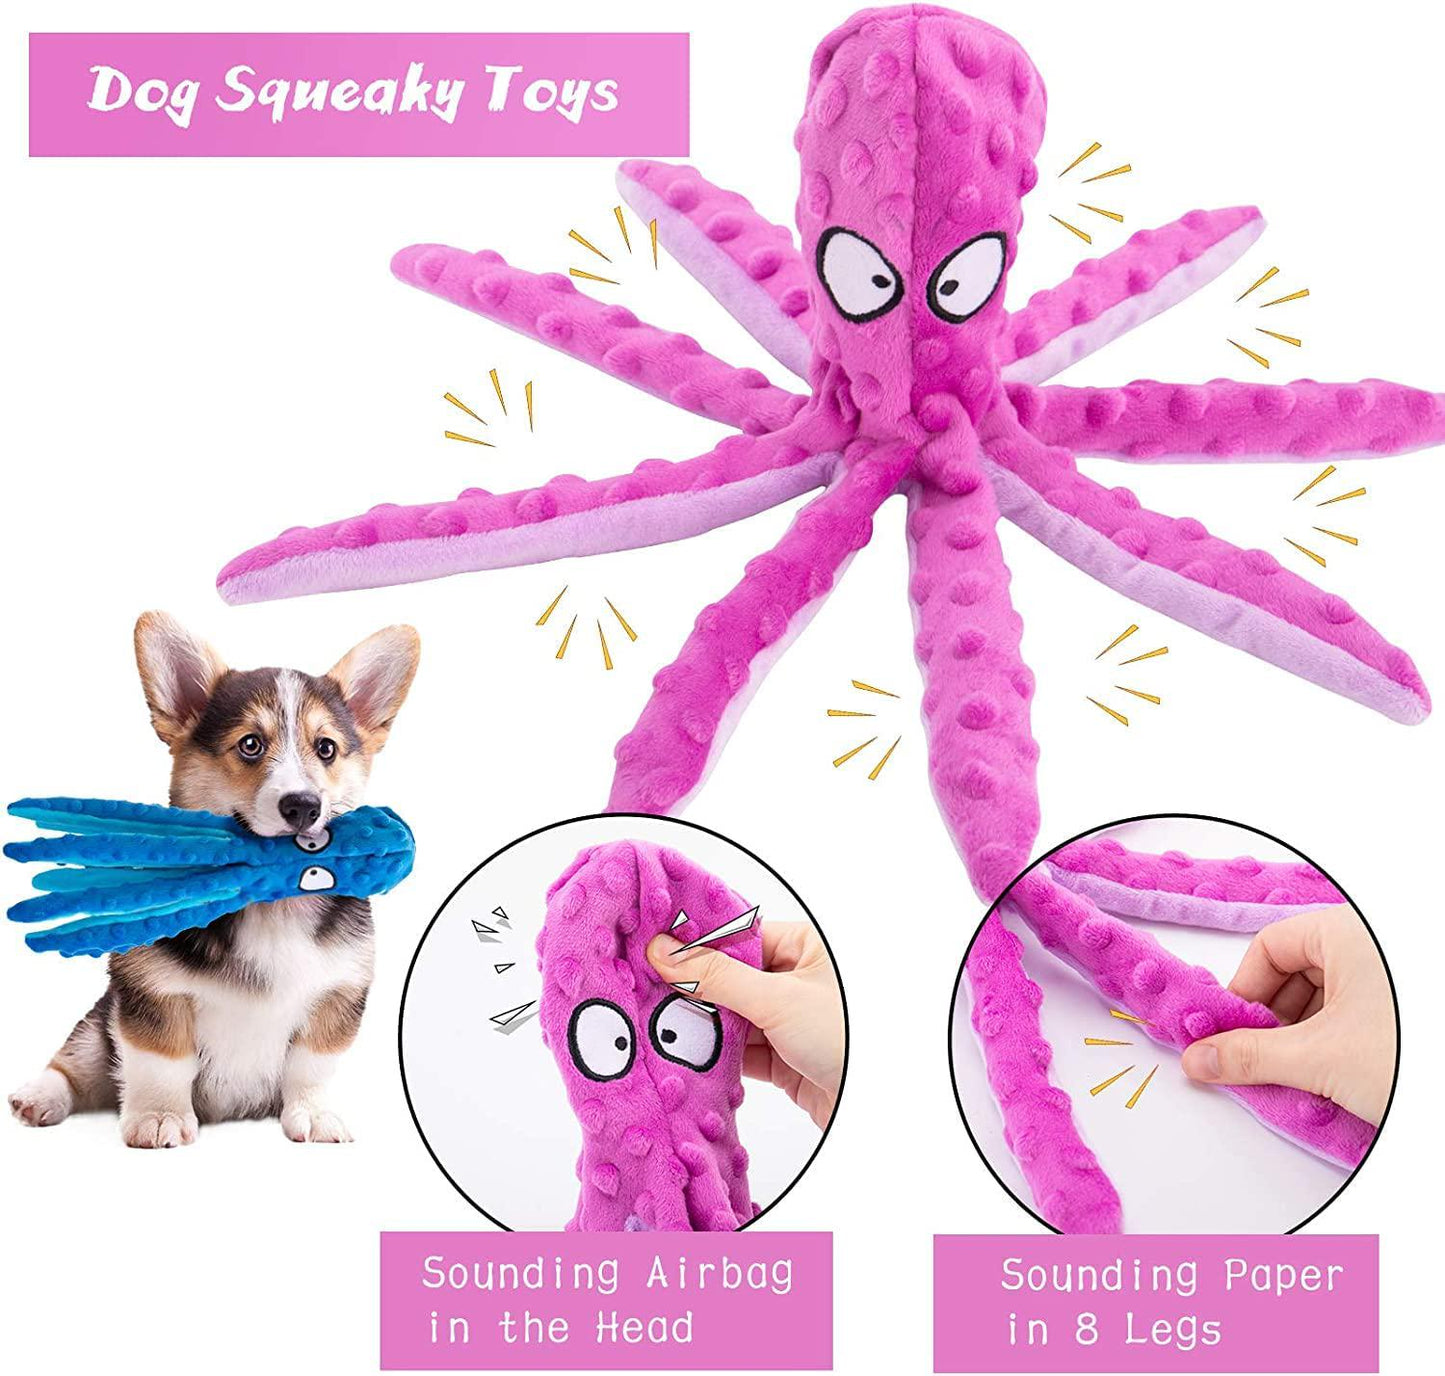 Squeaky Dog Toys, Octopus Toys for Aggressive Chewers, Tough No Stuffing Plush Large Dogs, Crinkle Interactive Puppy Small Medium Dogs(3pcs)